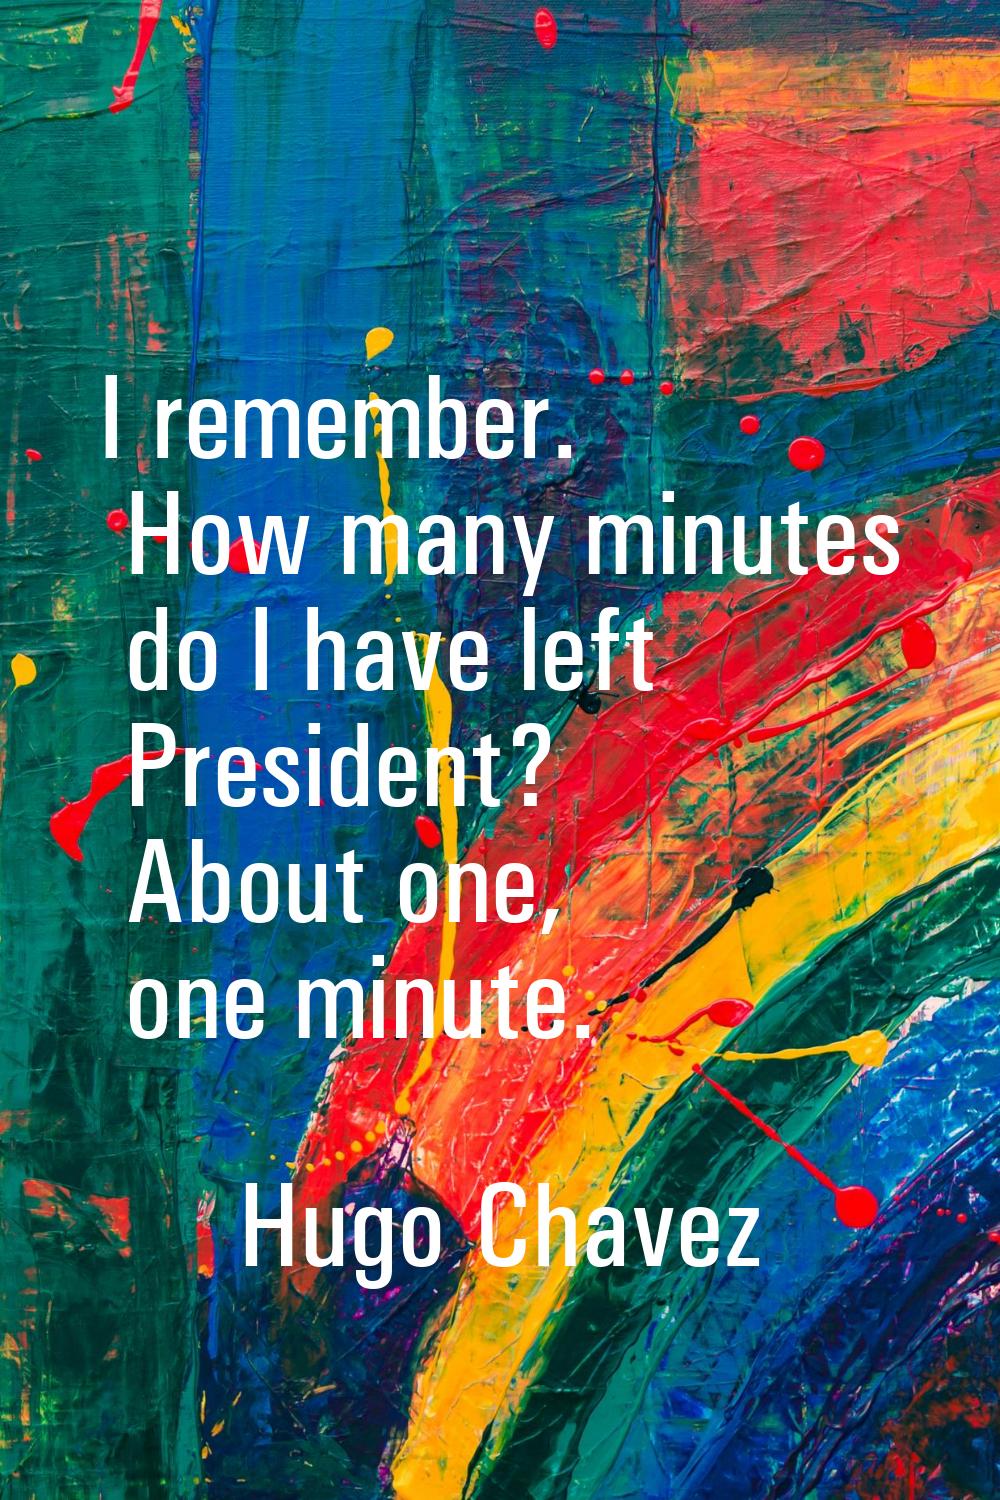 I remember. How many minutes do I have left President? About one, one minute.